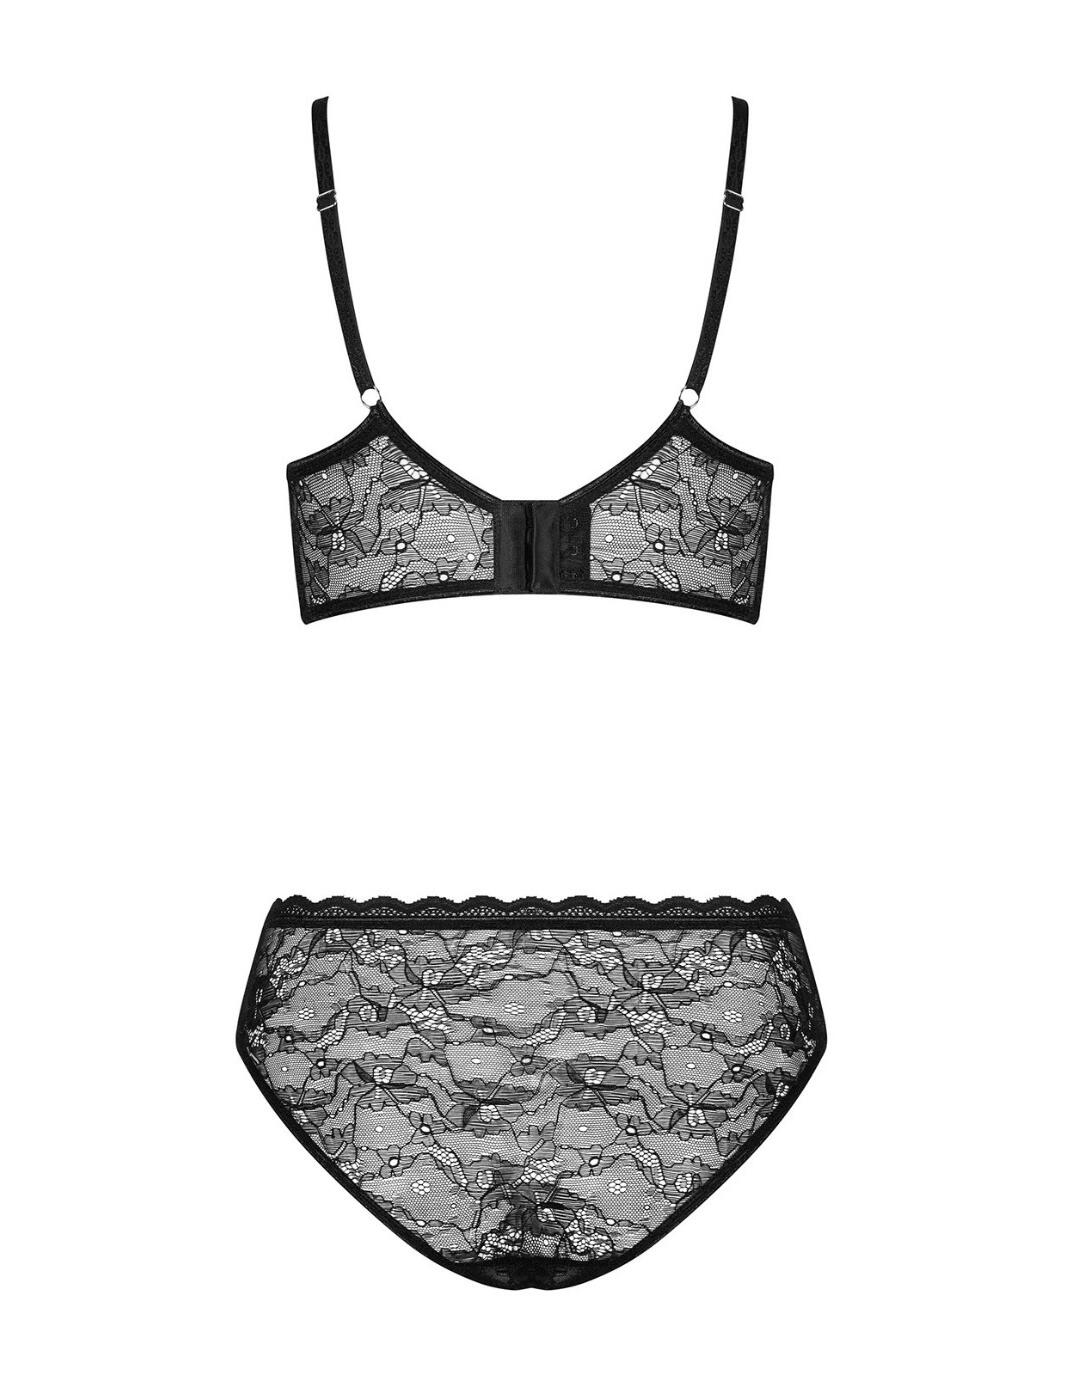 Women's black lacy lingerie set Obsessive Laurise buy at best prices with  international delivery in the catalog of the online store of lingerie